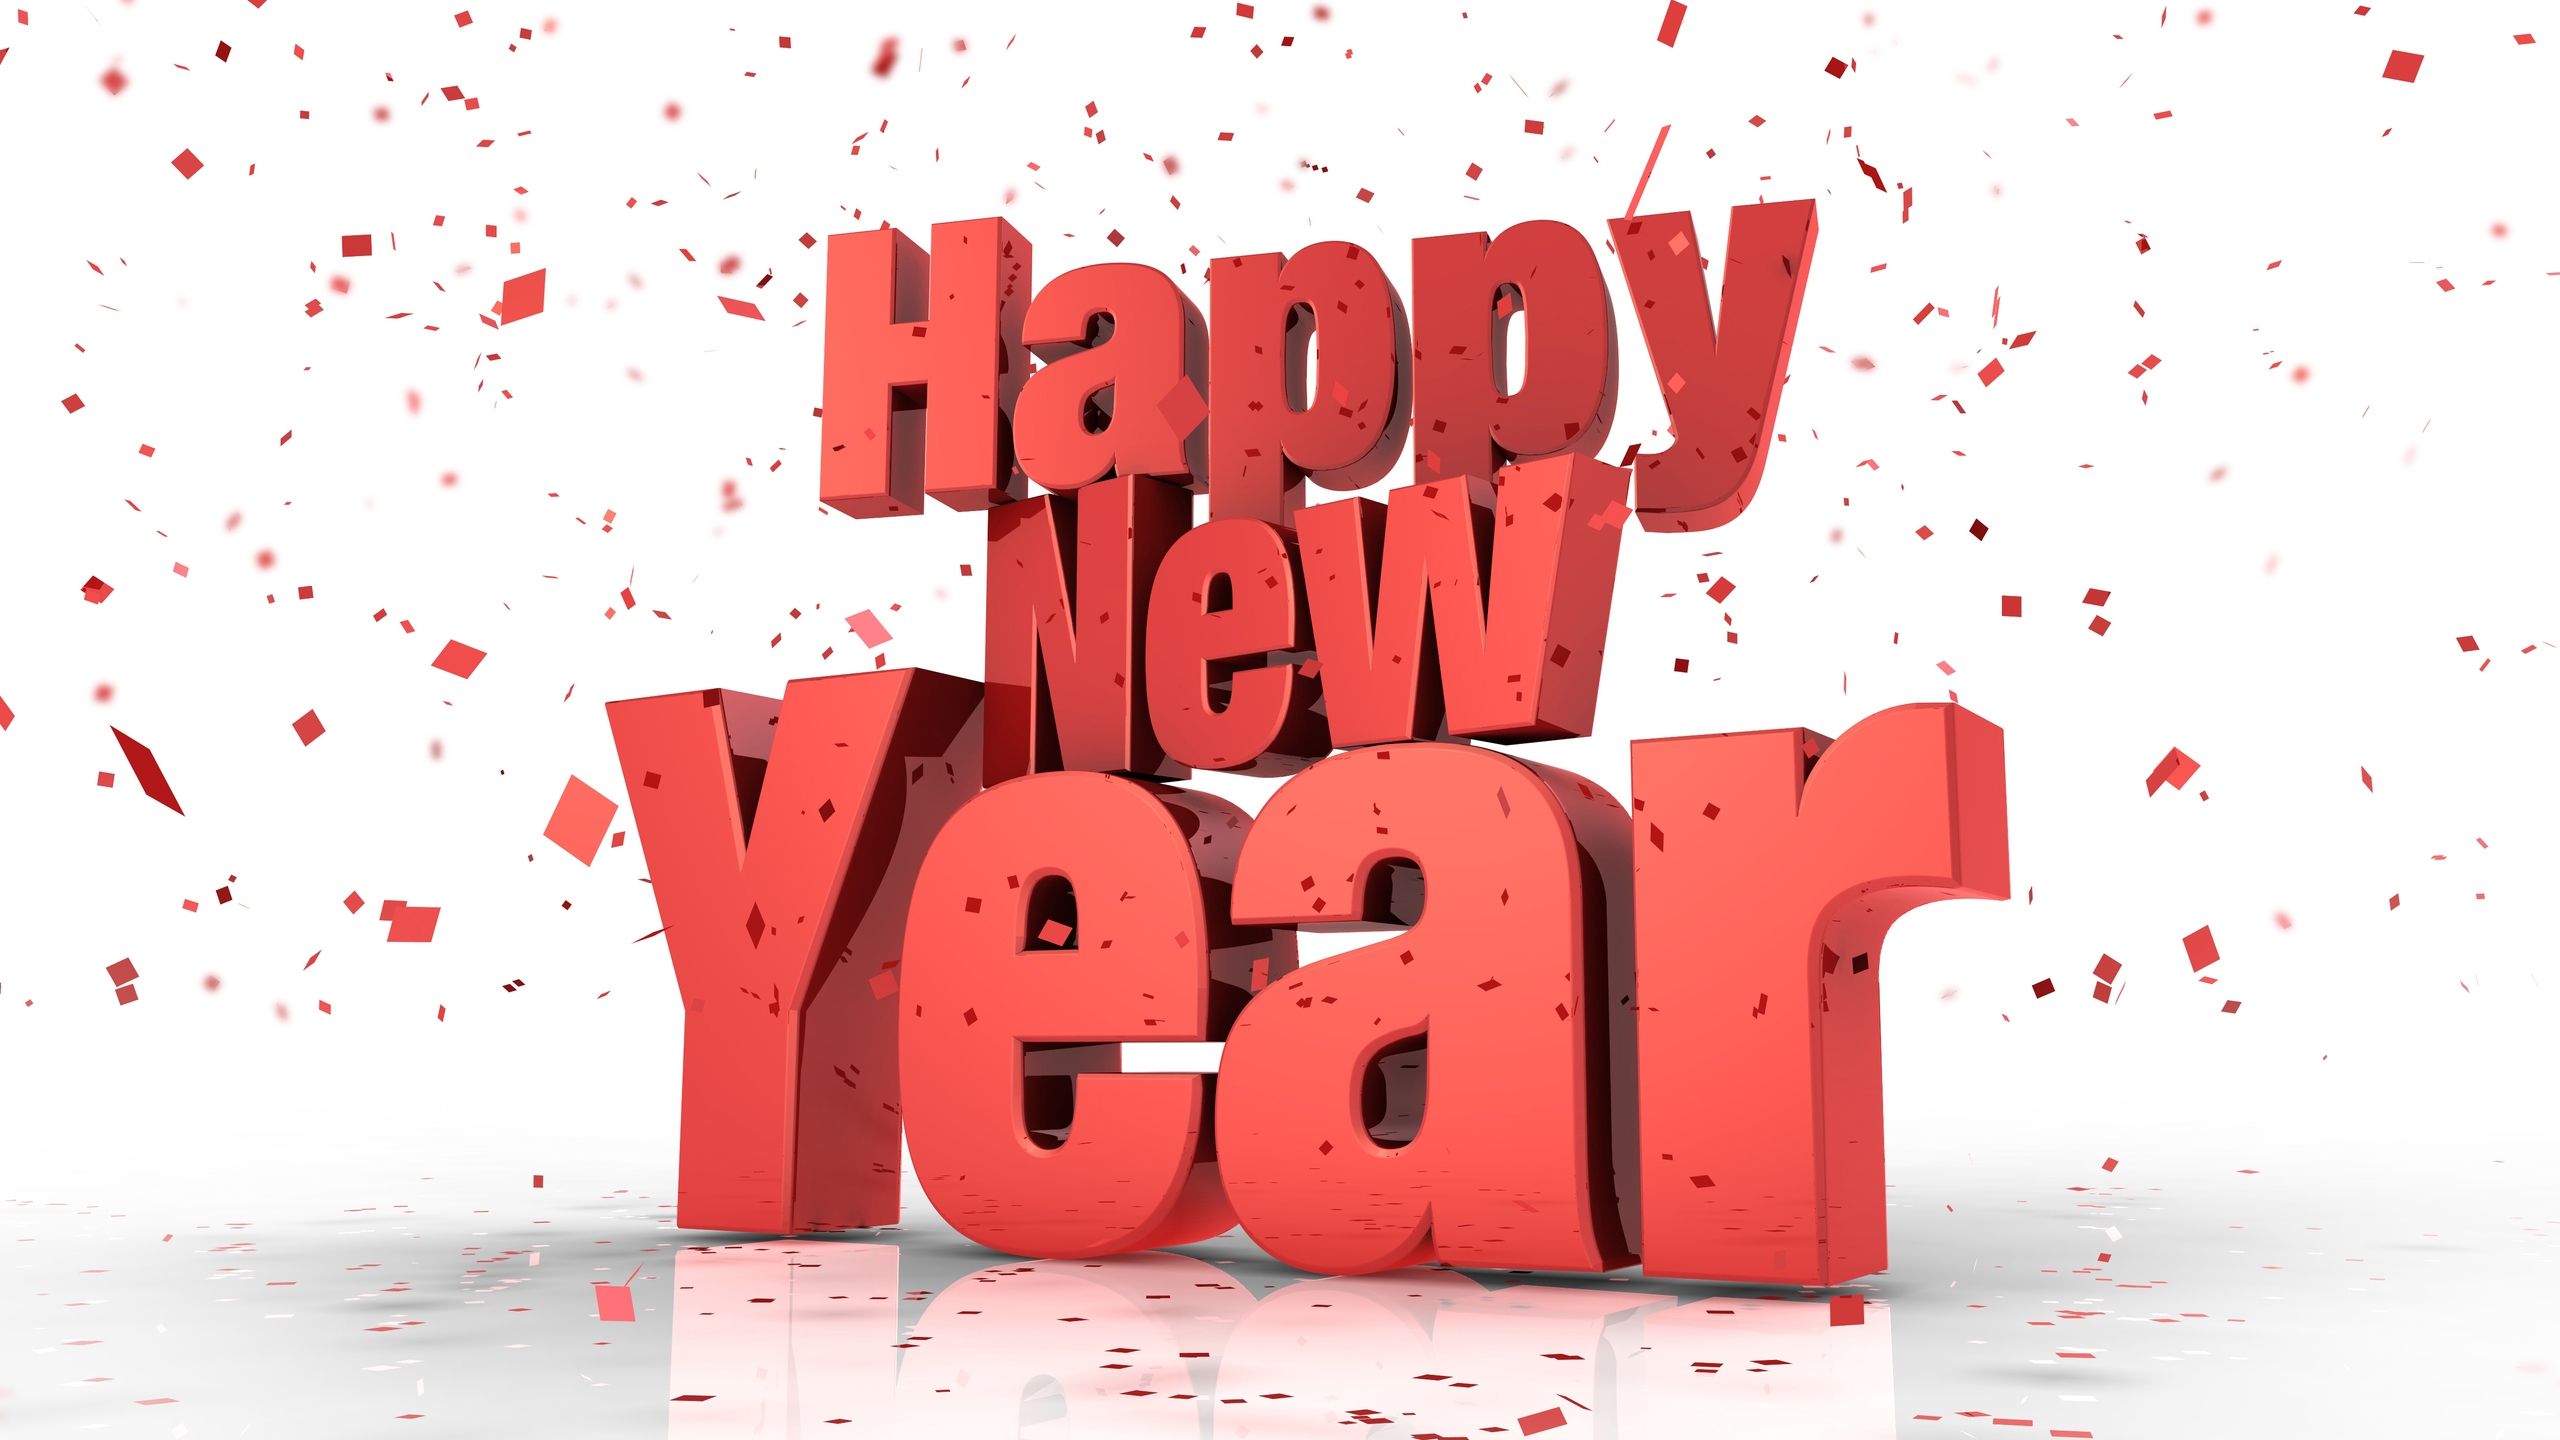 Happy New Year Font for 2560x1440 HDTV resolution